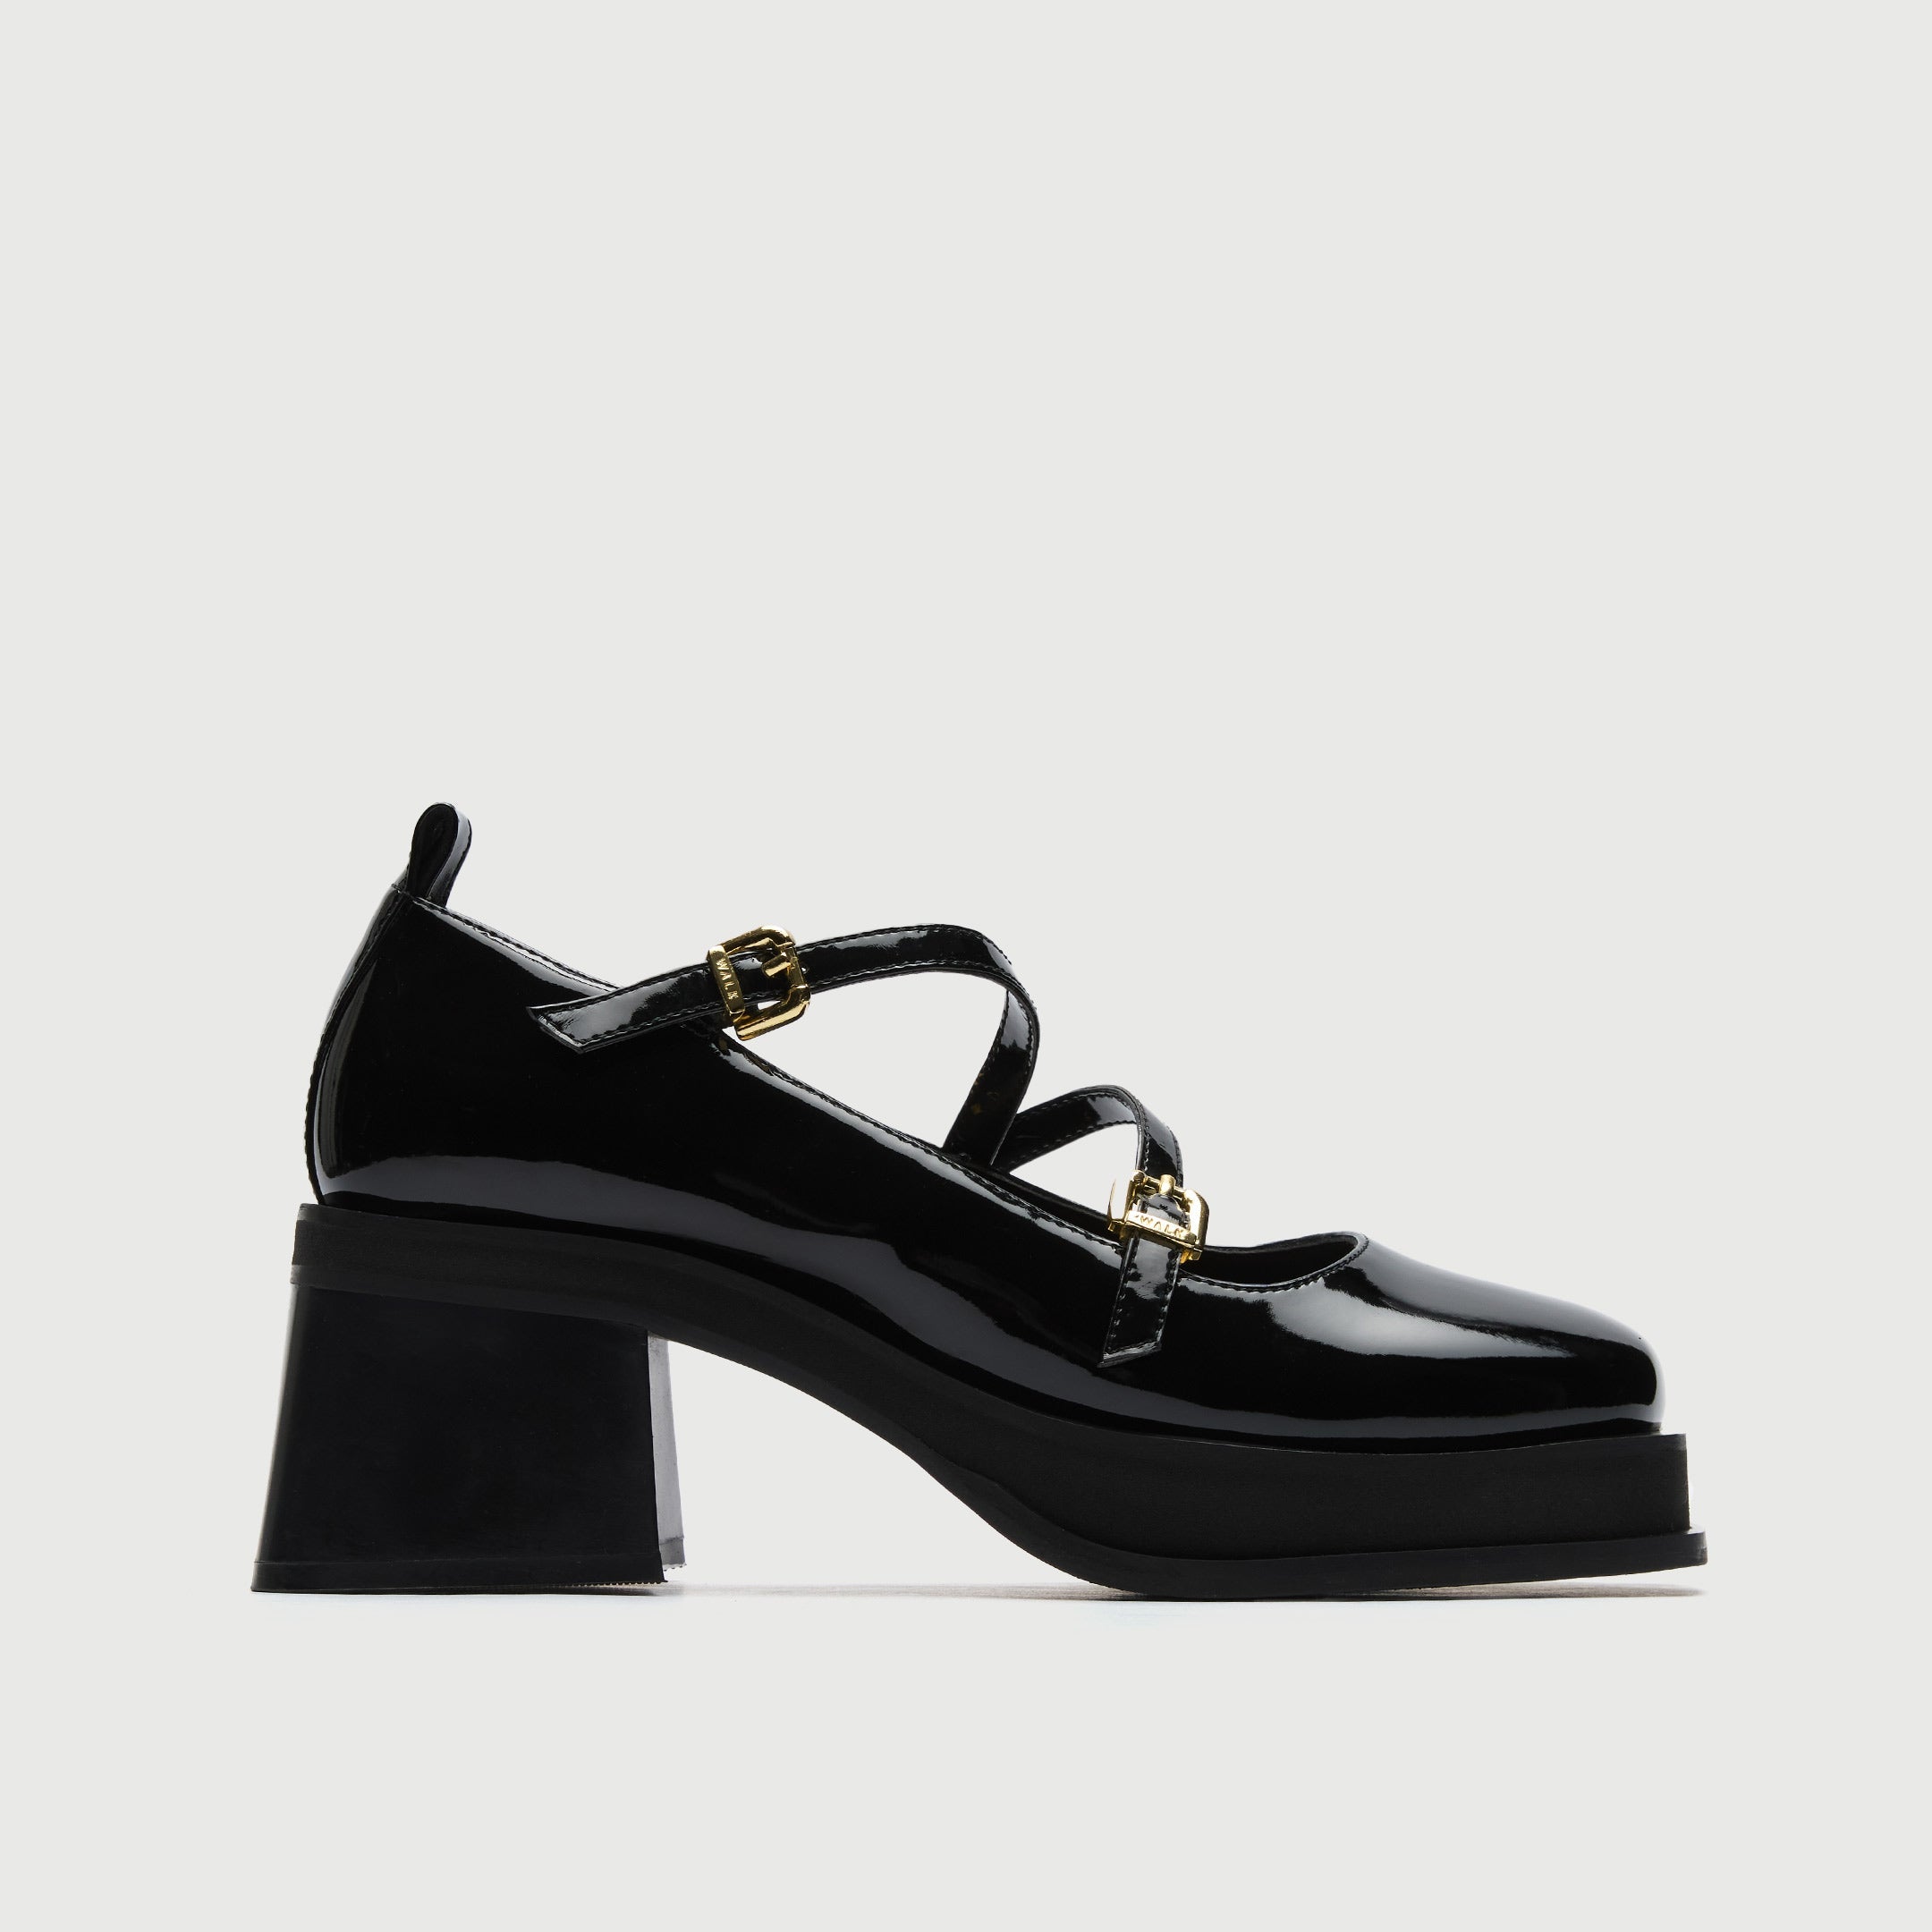 Walk London Womens Lily Ballerina in Patent Black Leather